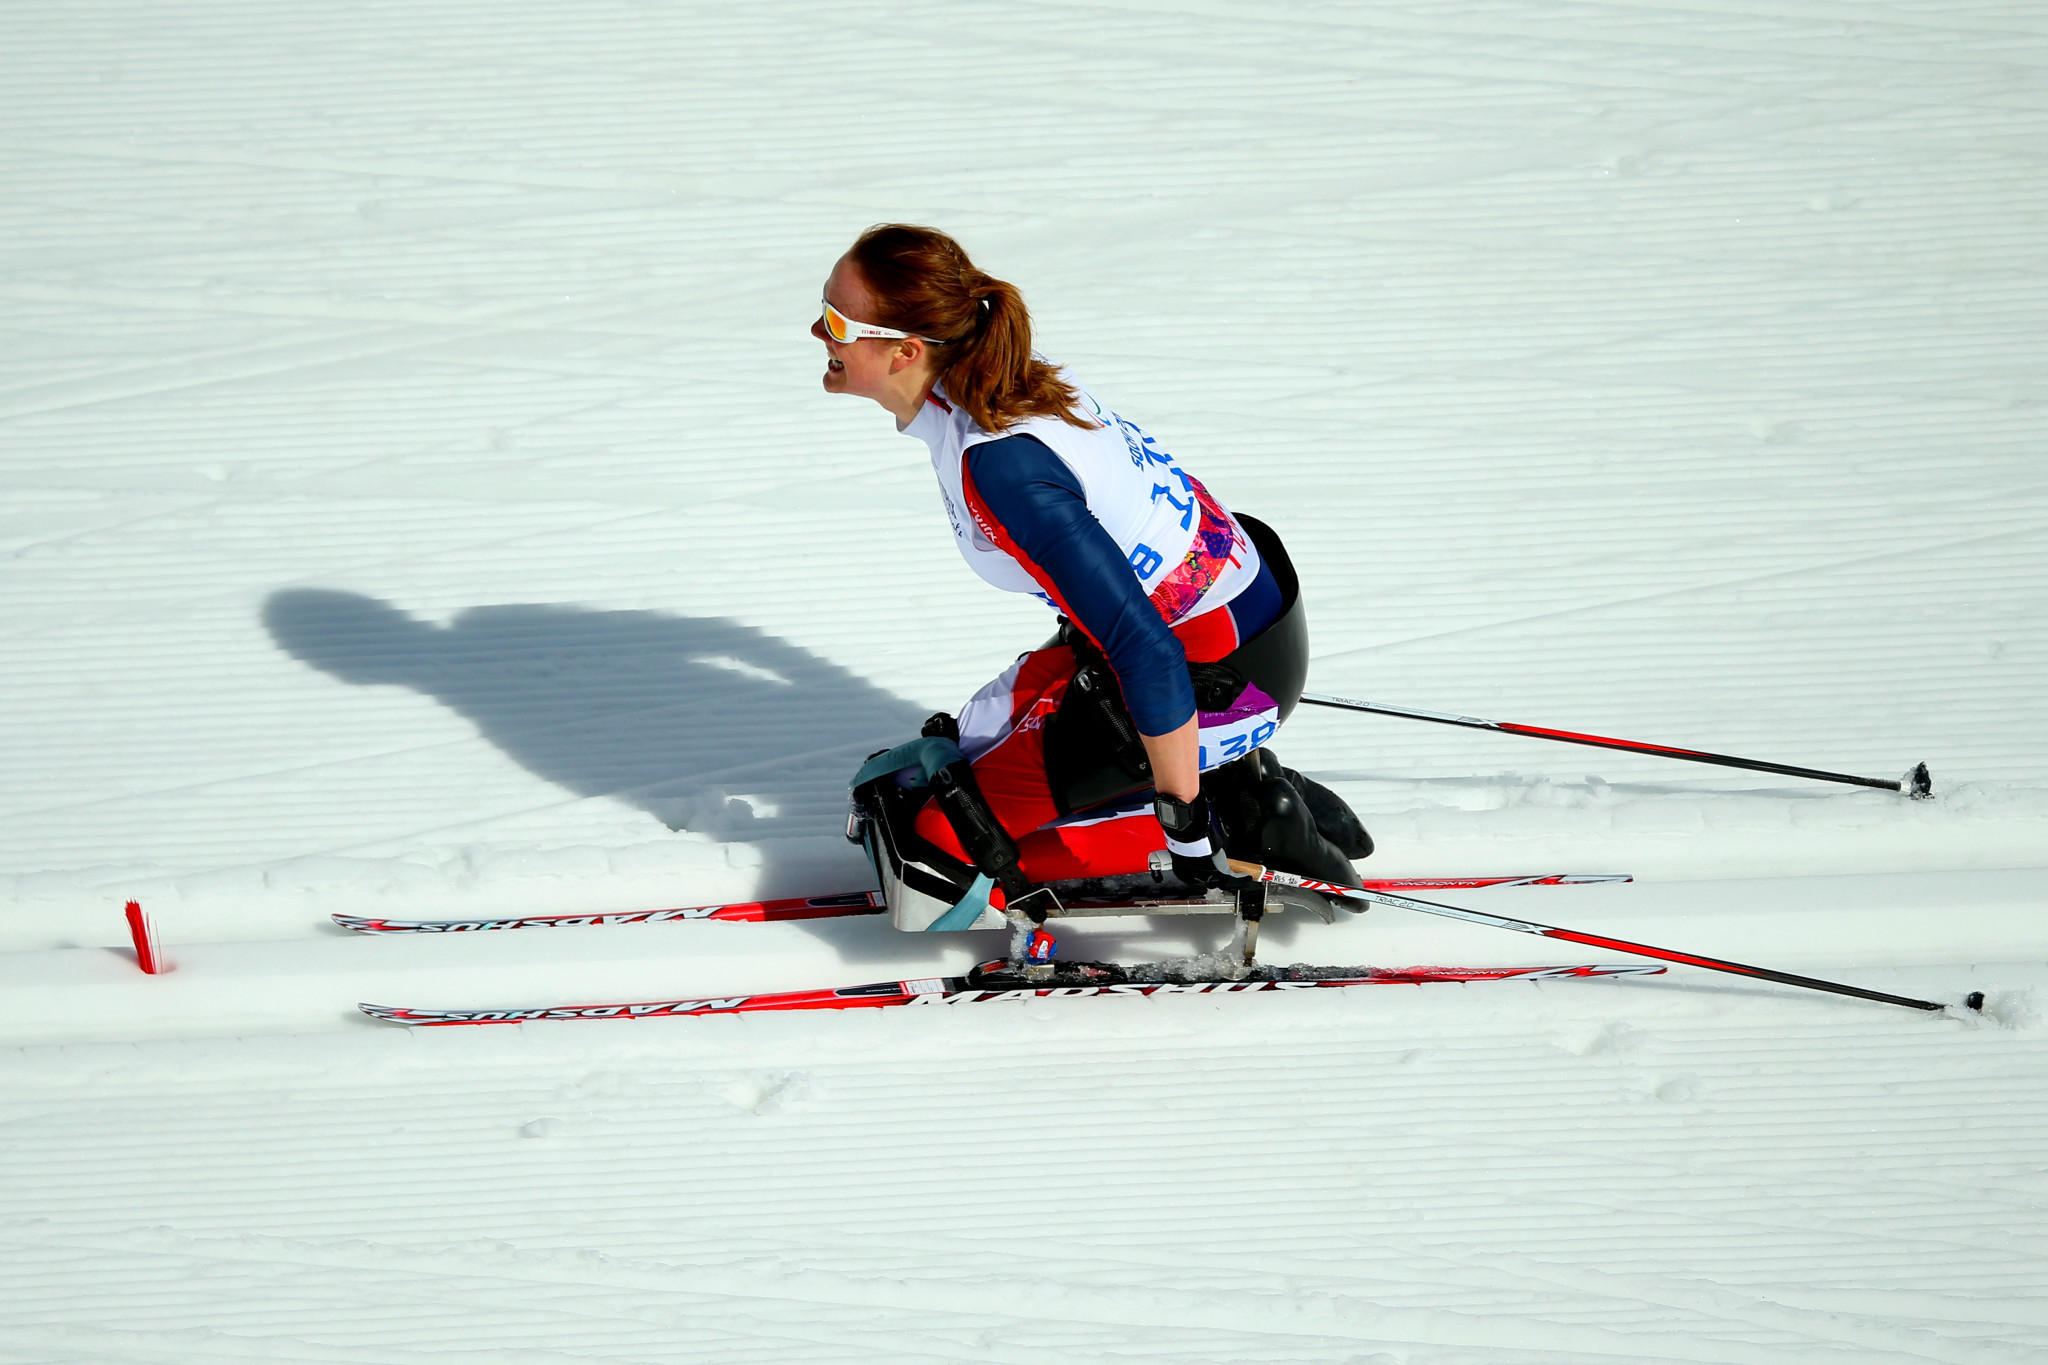 Skarstein secures first World Para Nordic Skiing World Cup win of